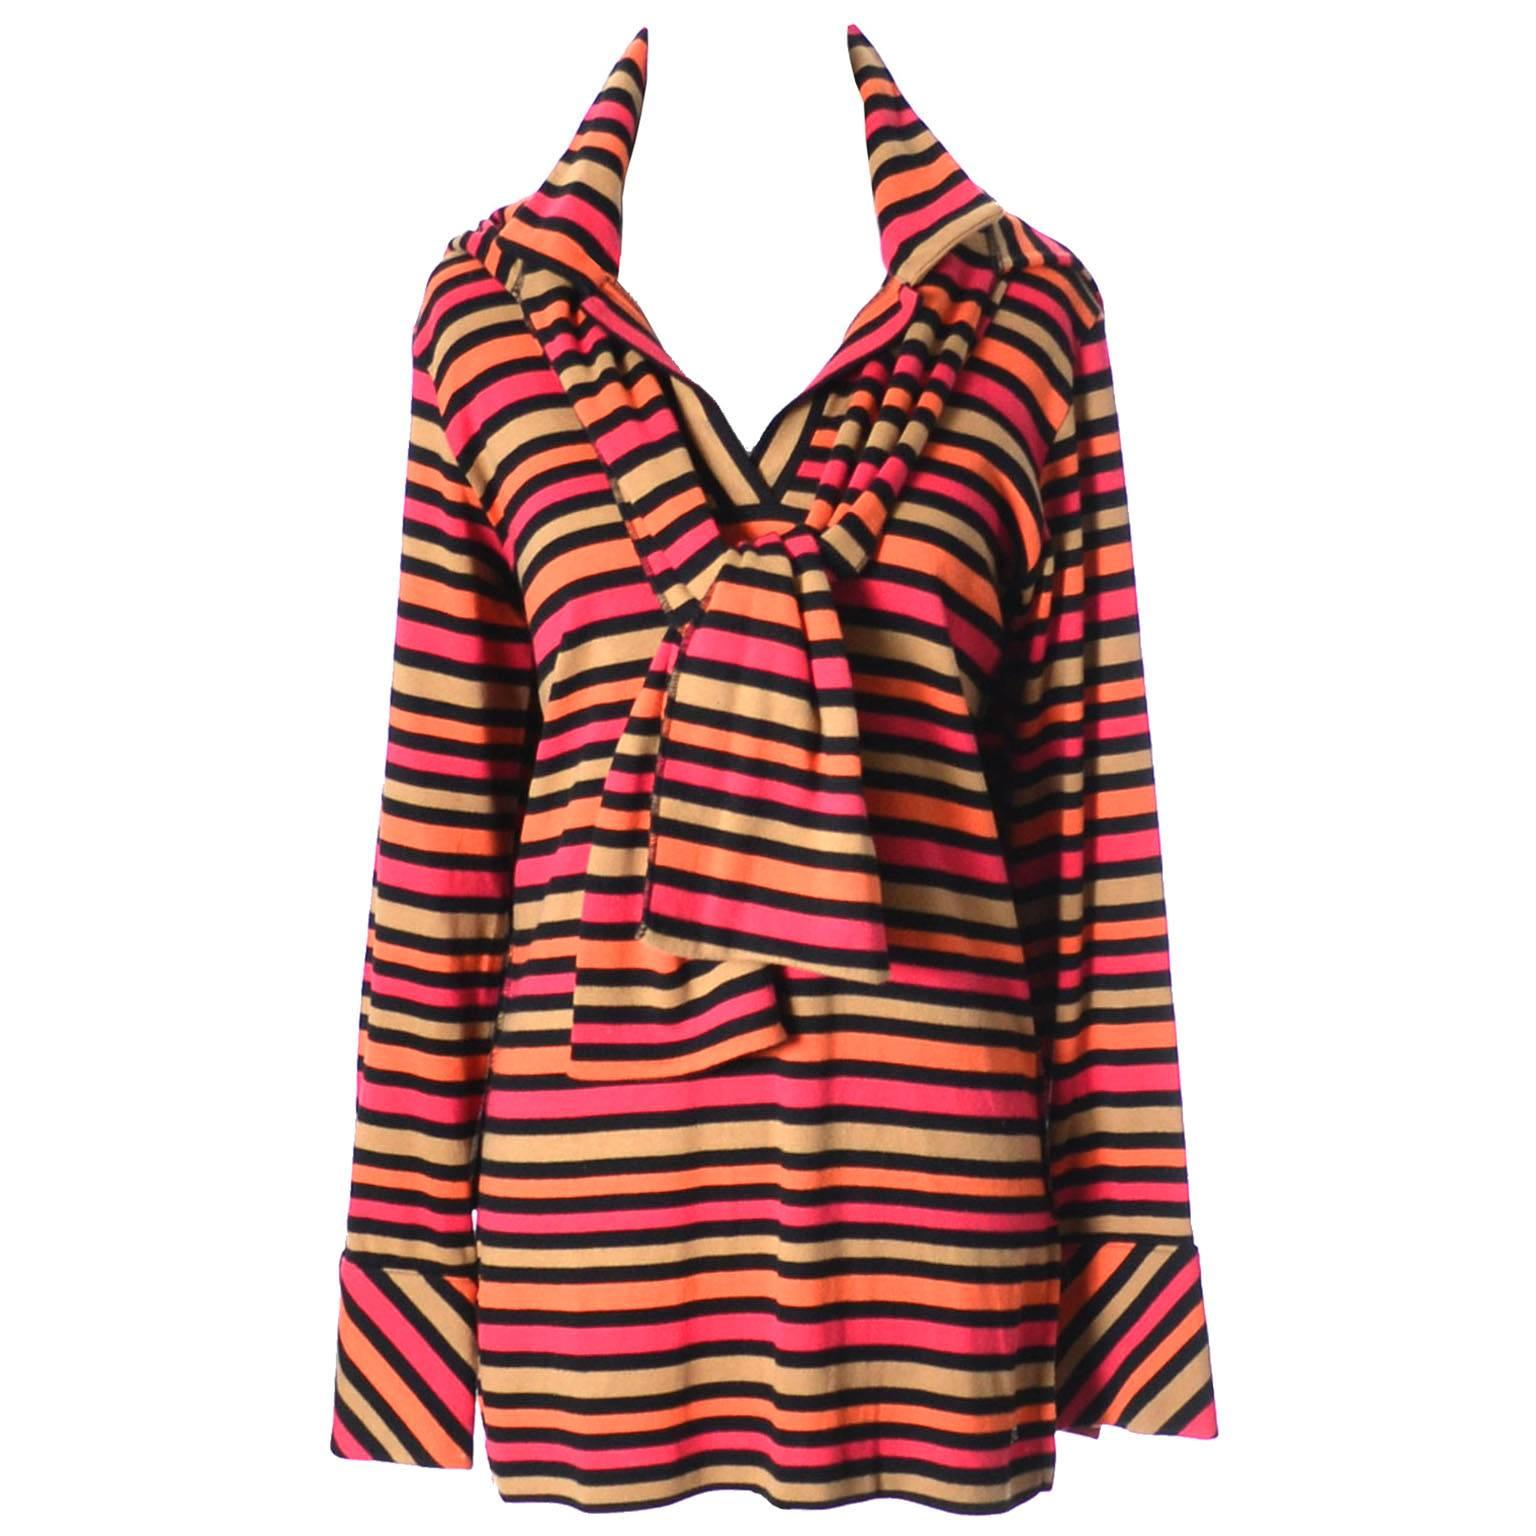 This is a 2 piece vintage Sonia Rykiel Paris Striped 100% cotton ensemble that includes a long sleeved top and coordinating 1/2 top to tie around your neck!  Sonia Rykiel always designs things in such a unique 